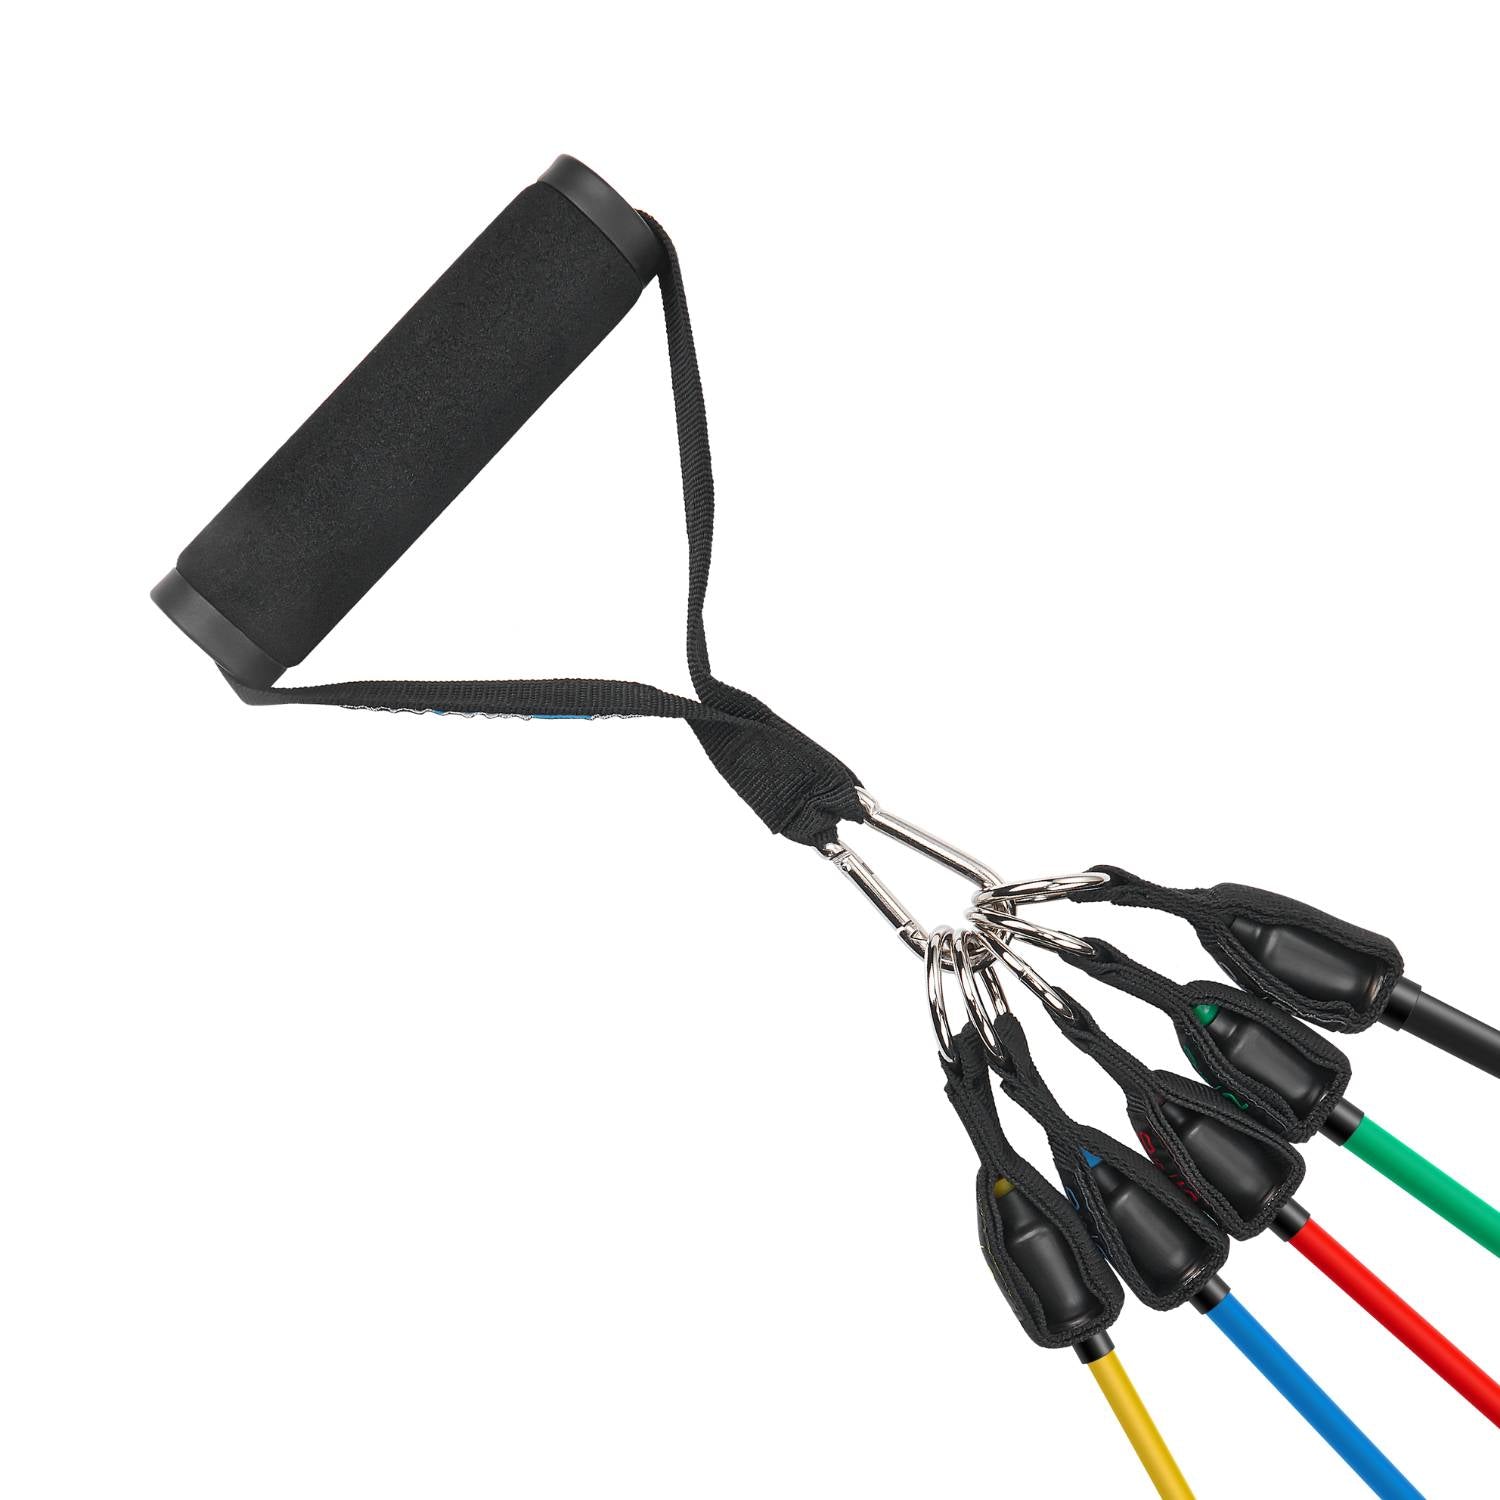 3dactive resistance bands handle and connections